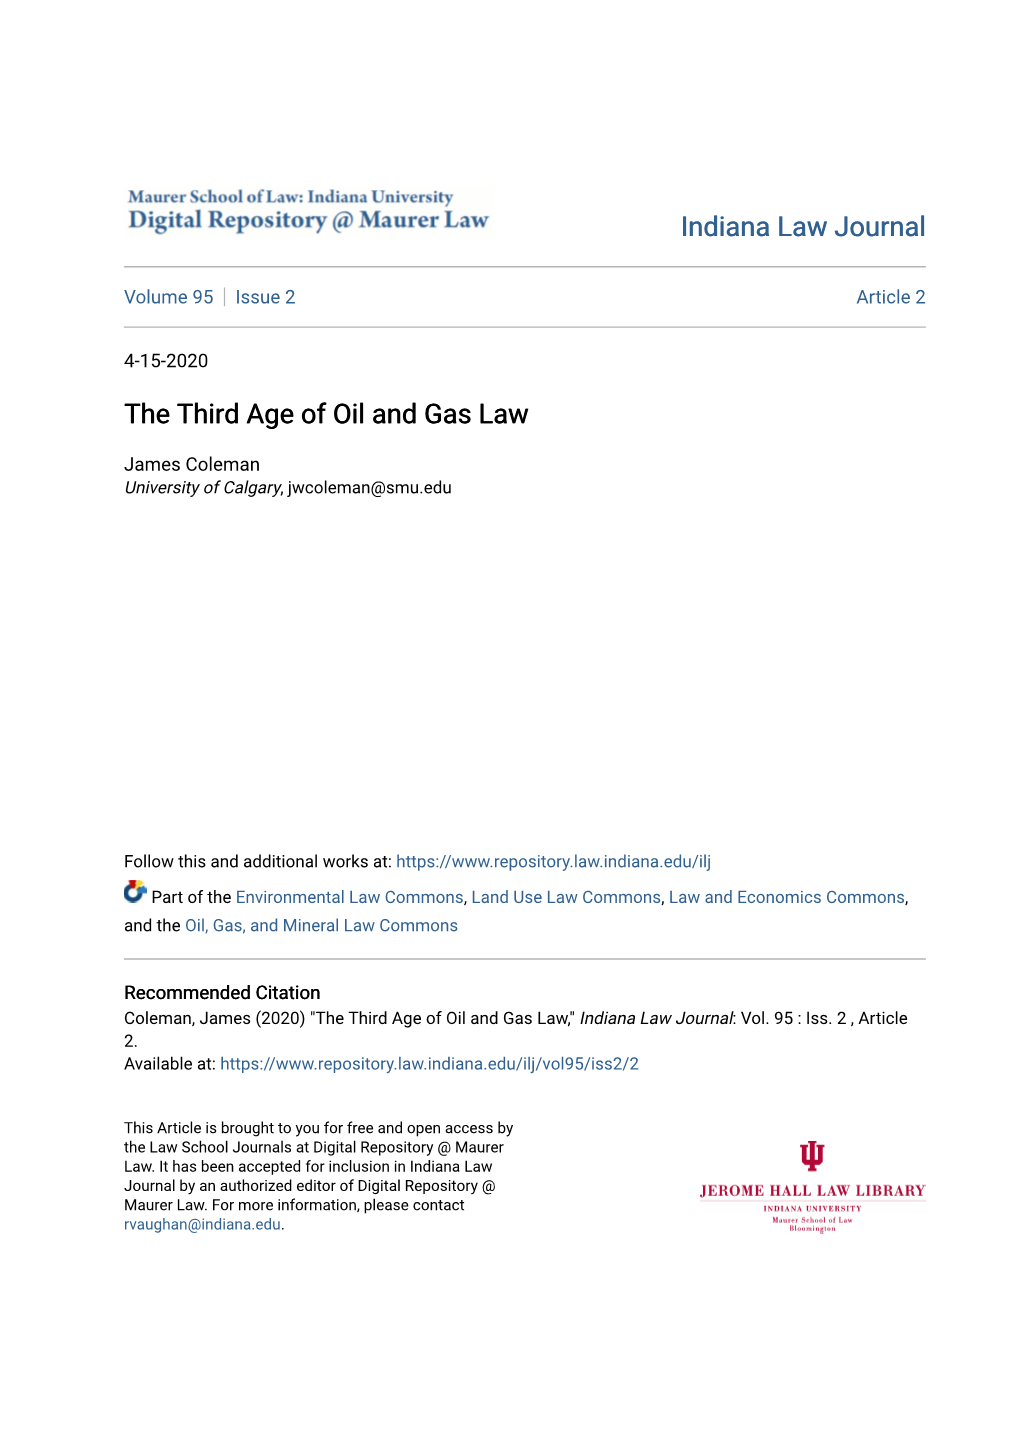 Indiana Law Journal the Third Age of Oil and Gas